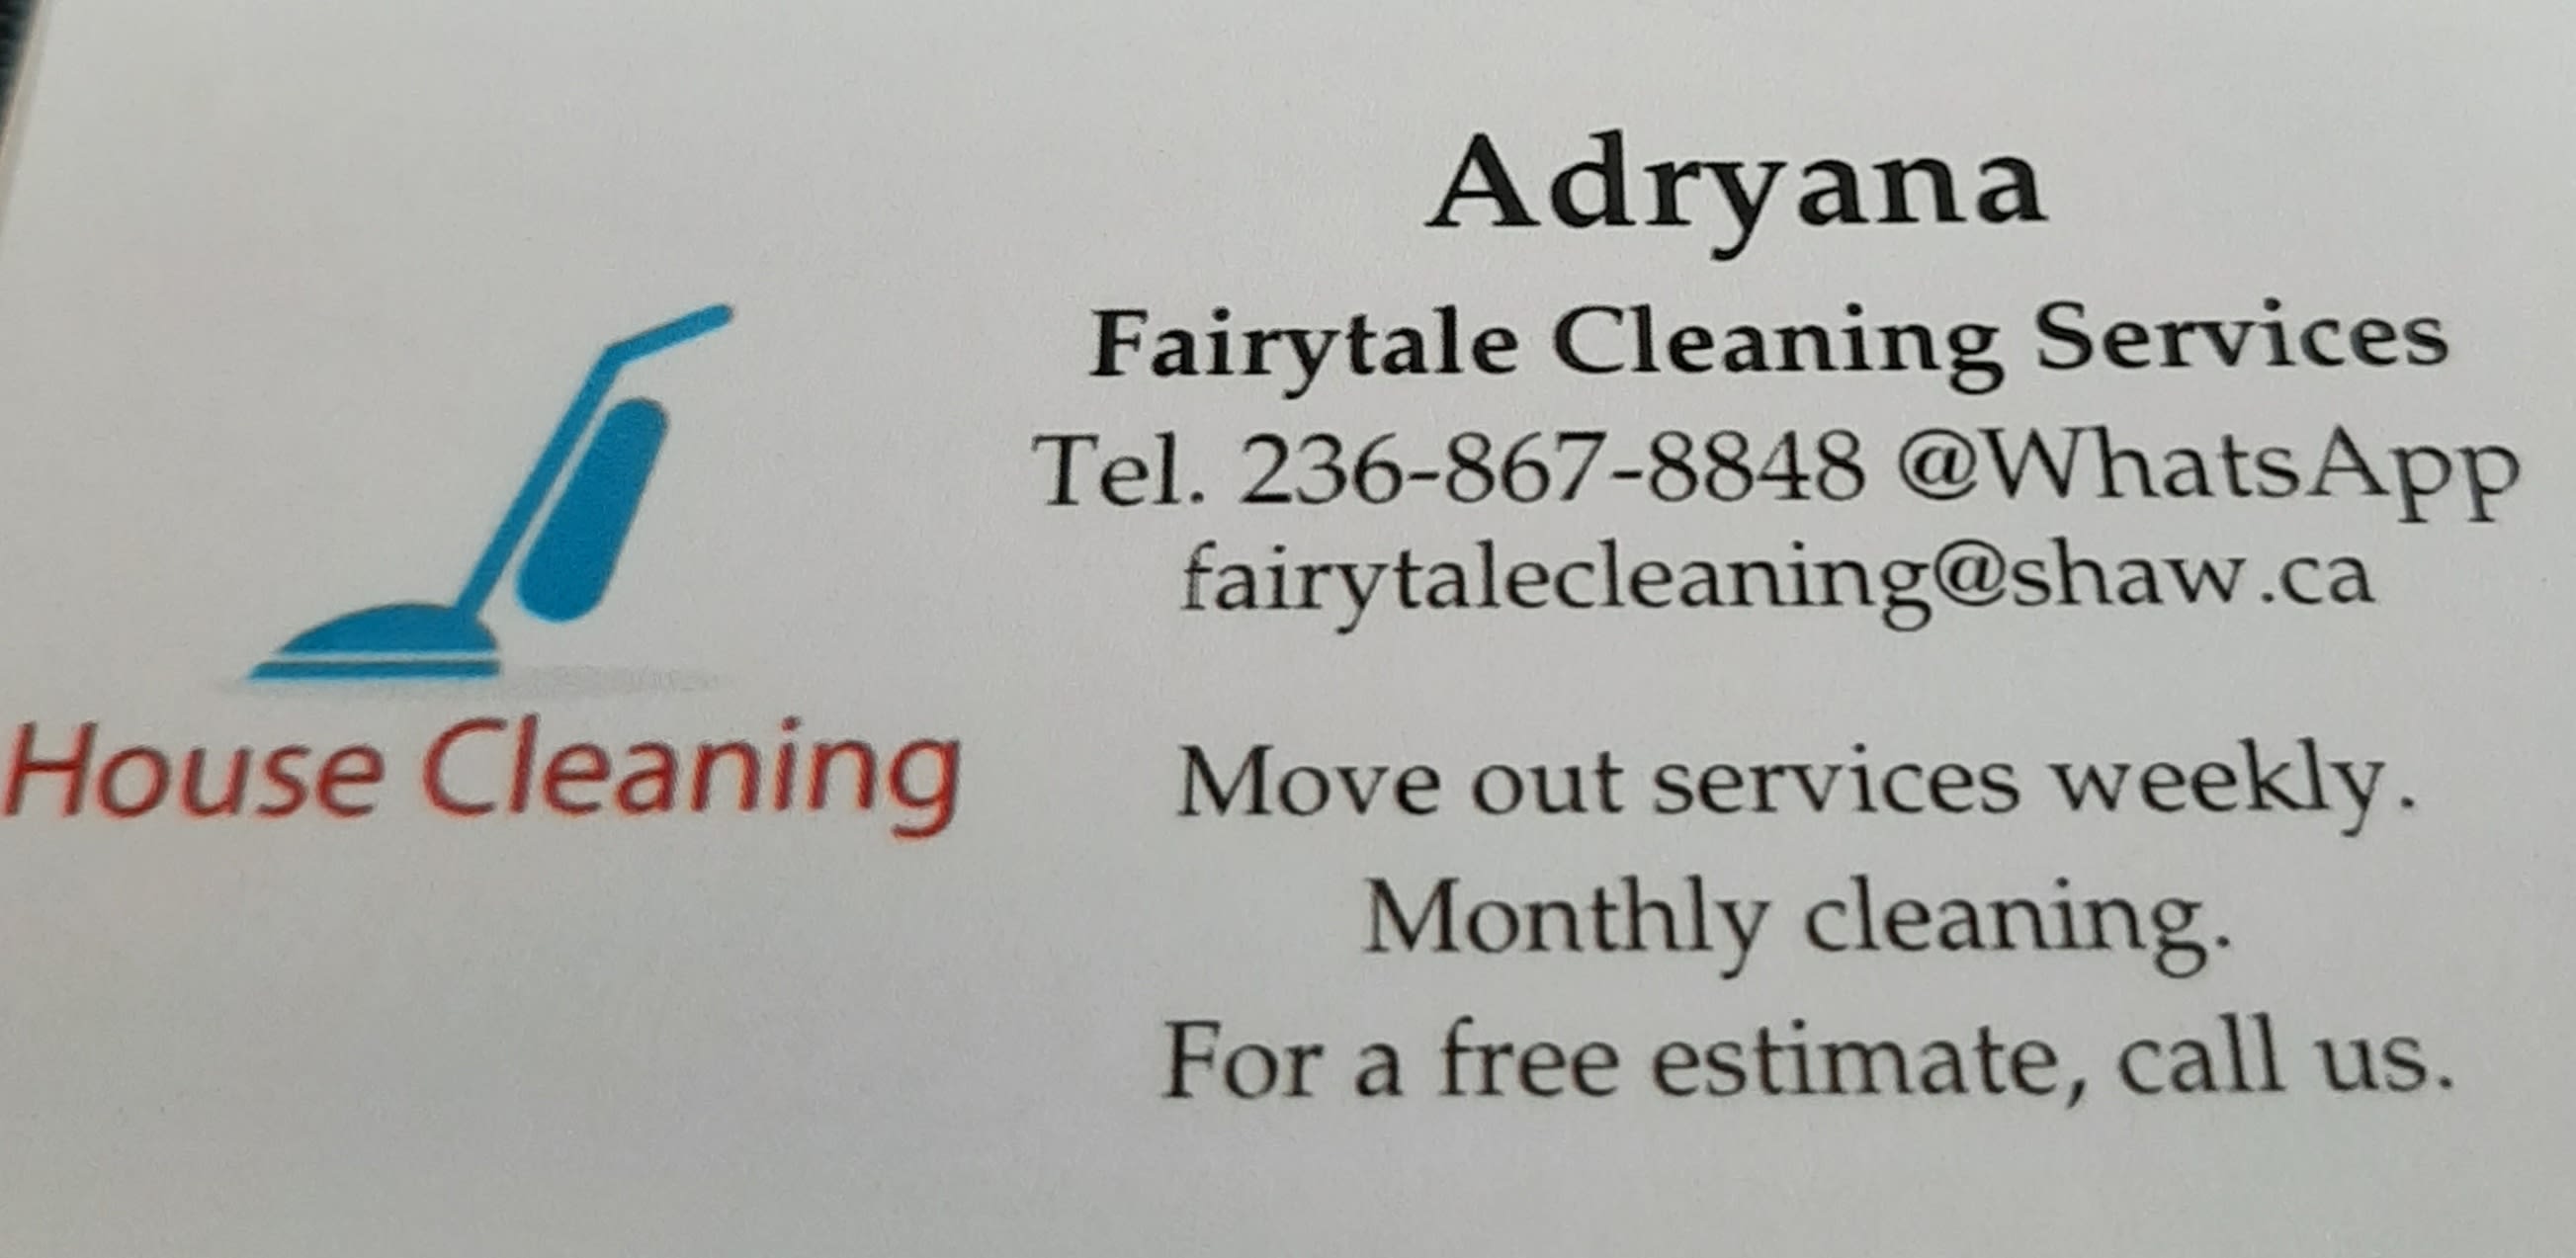 Fairytale Cleaning Services